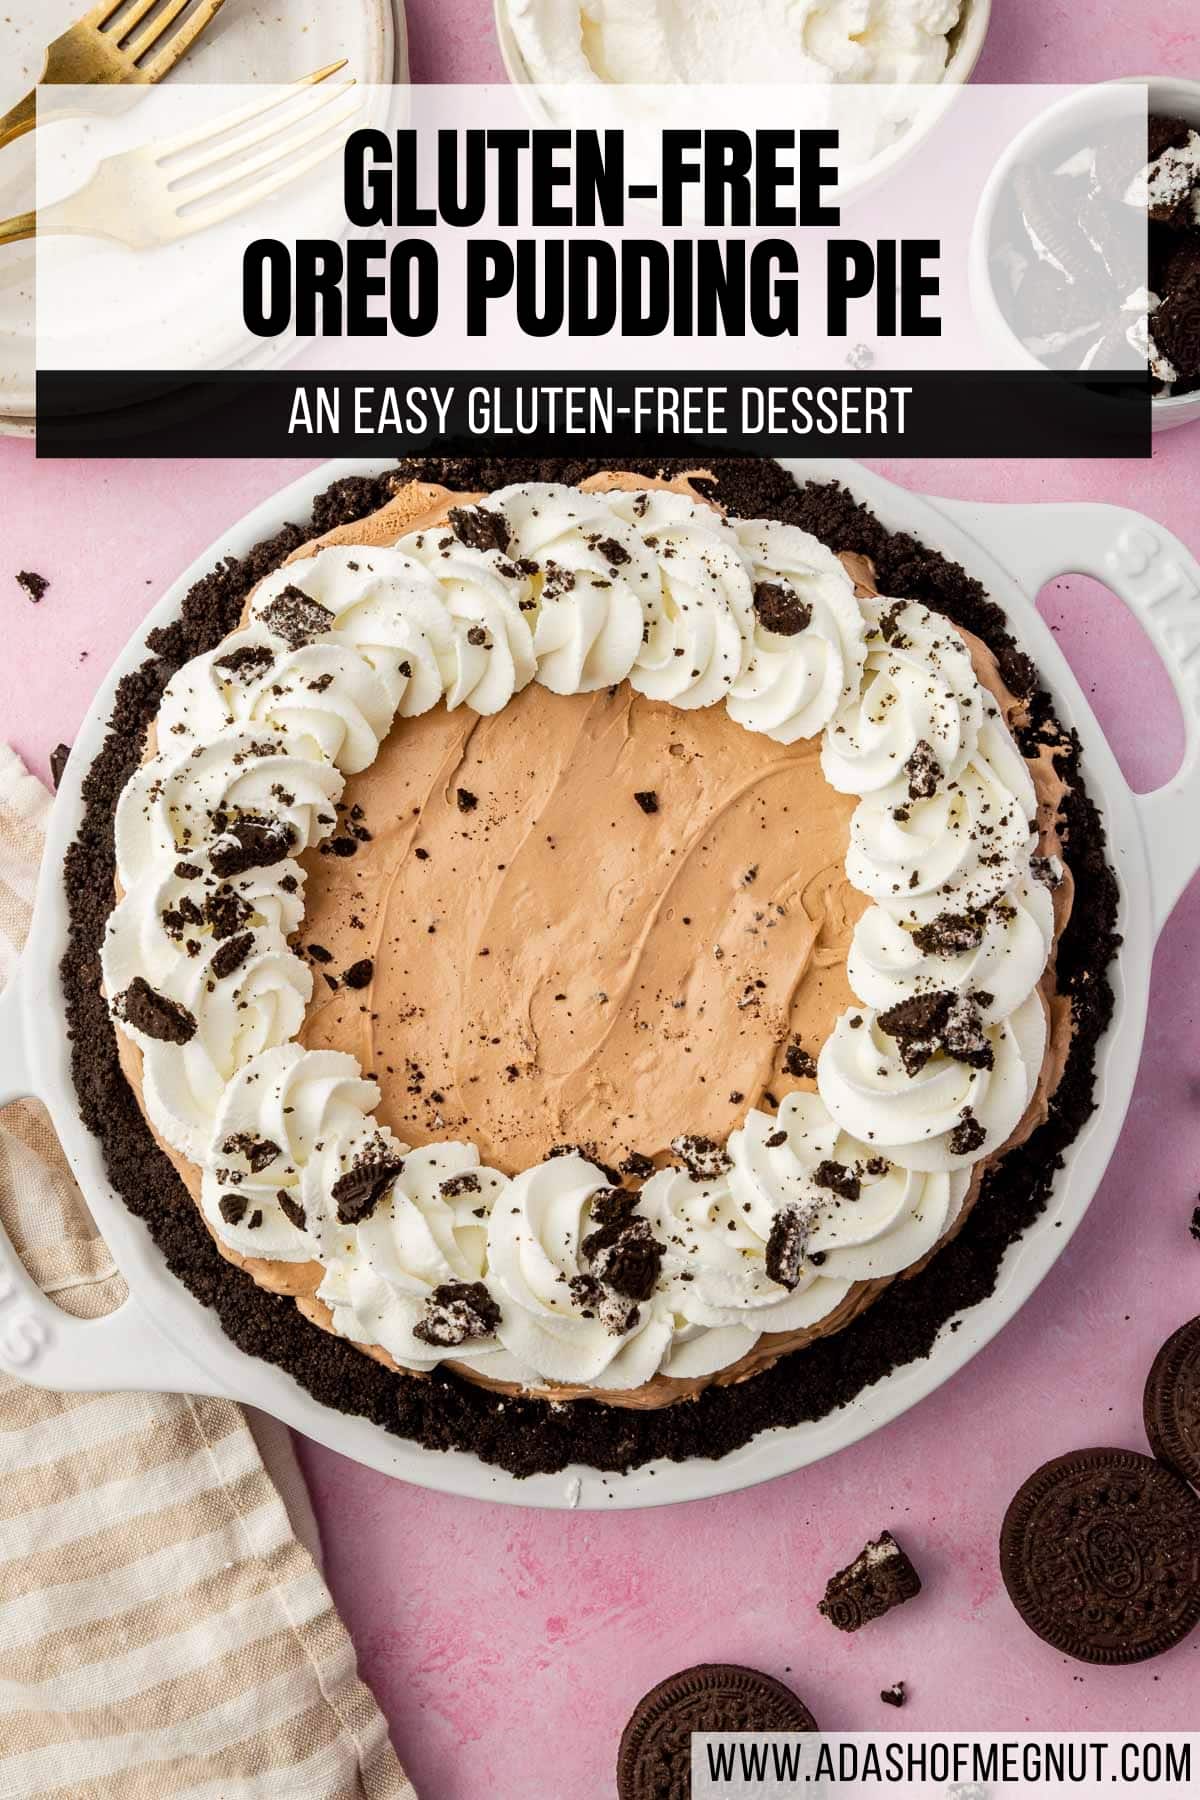 An overhead view of a gluten-free Oreo pudding pie on a pink table.